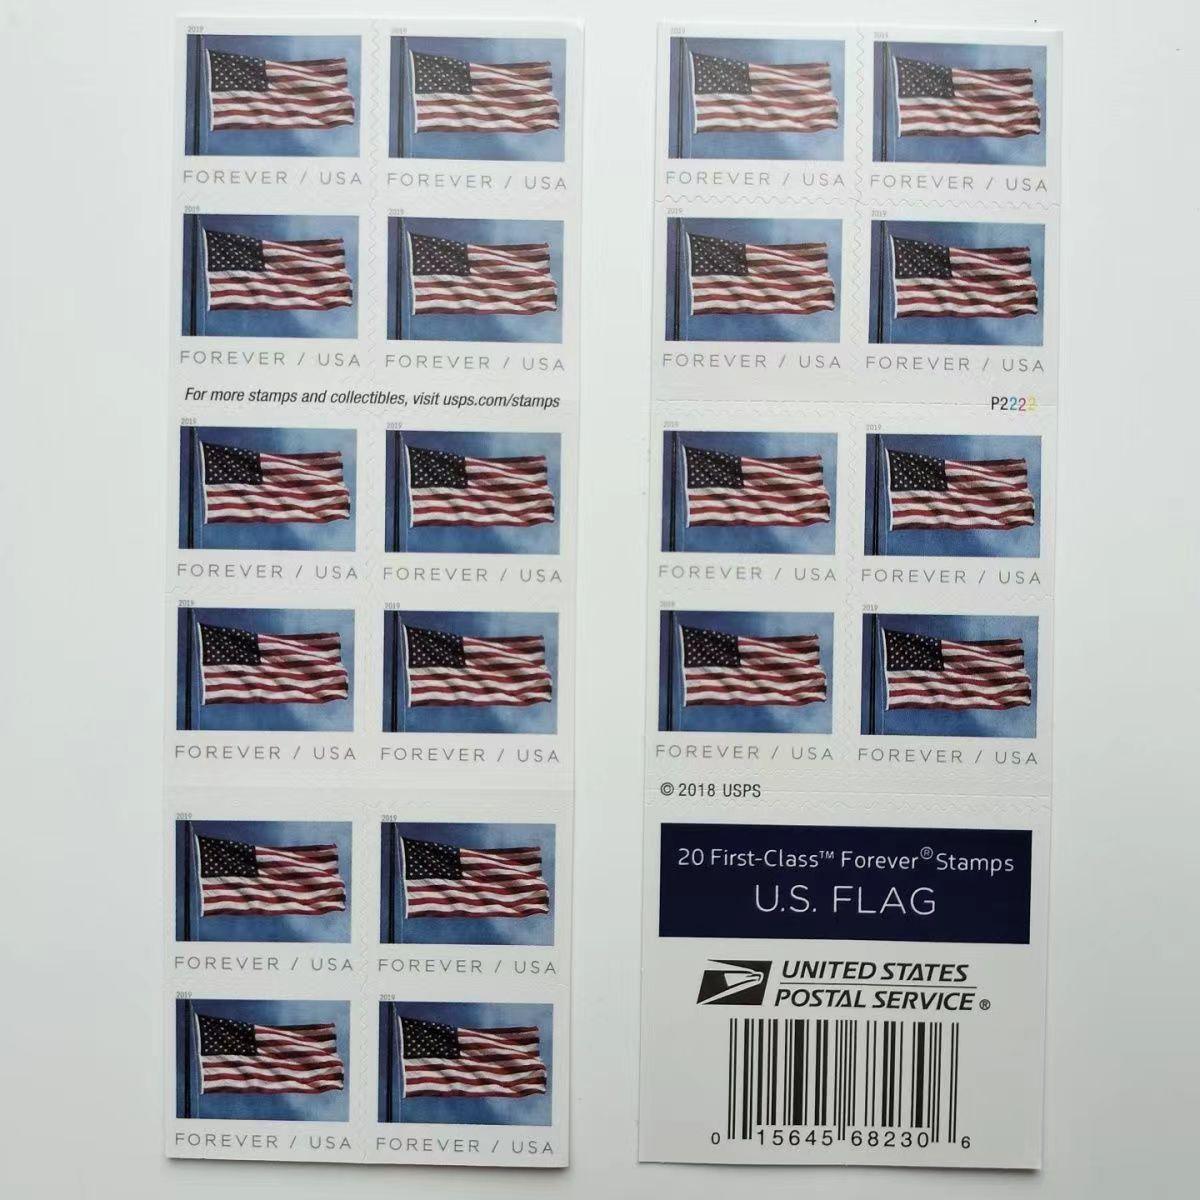 A booklet of "Flag 2019" postage stamps featuring the American flag.